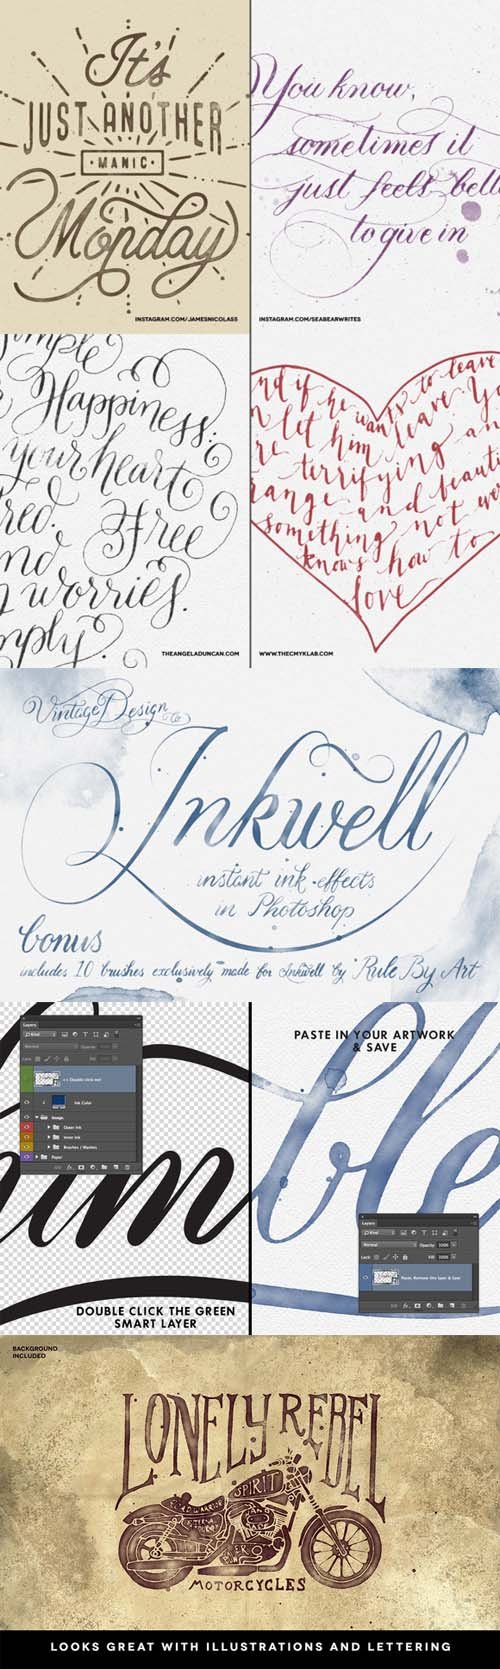 Inkwell - Instant Ink Effects